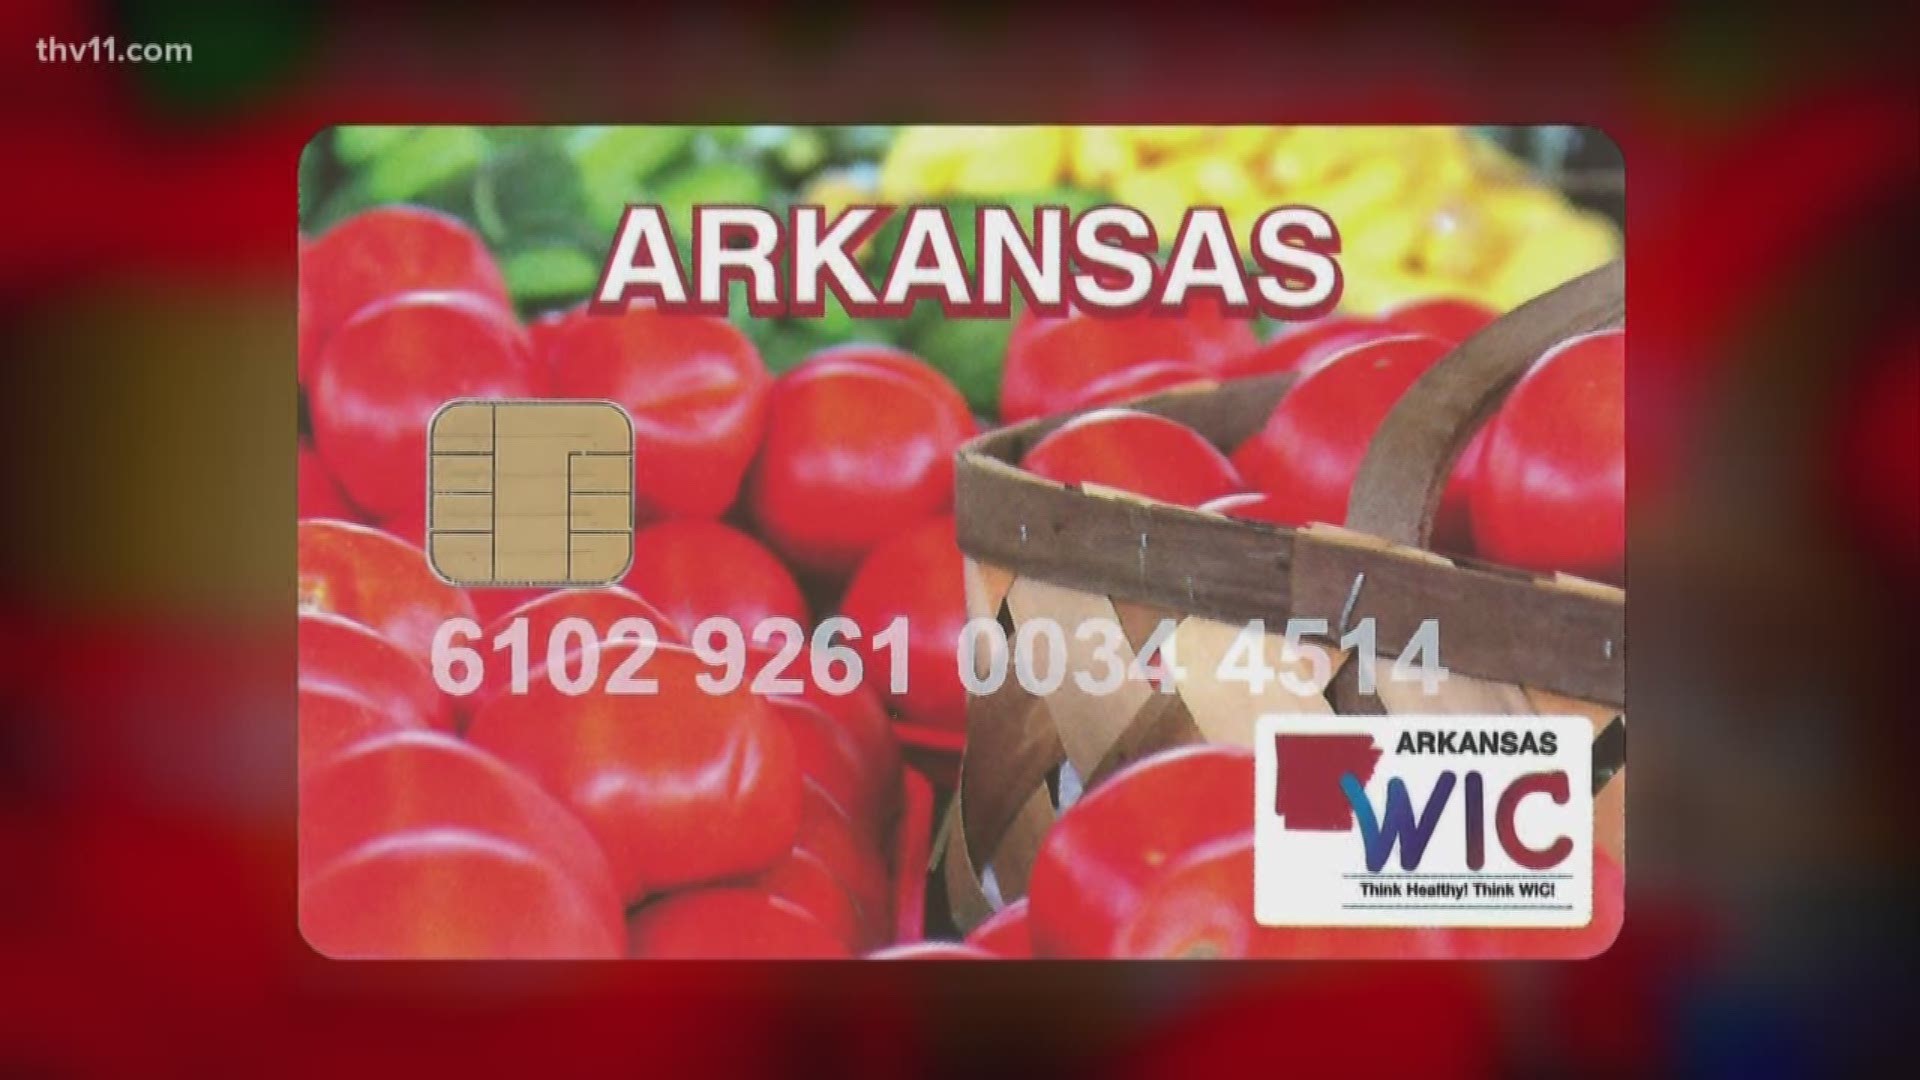 Arkansas WIC rolls out new EBT cards to make process quicker